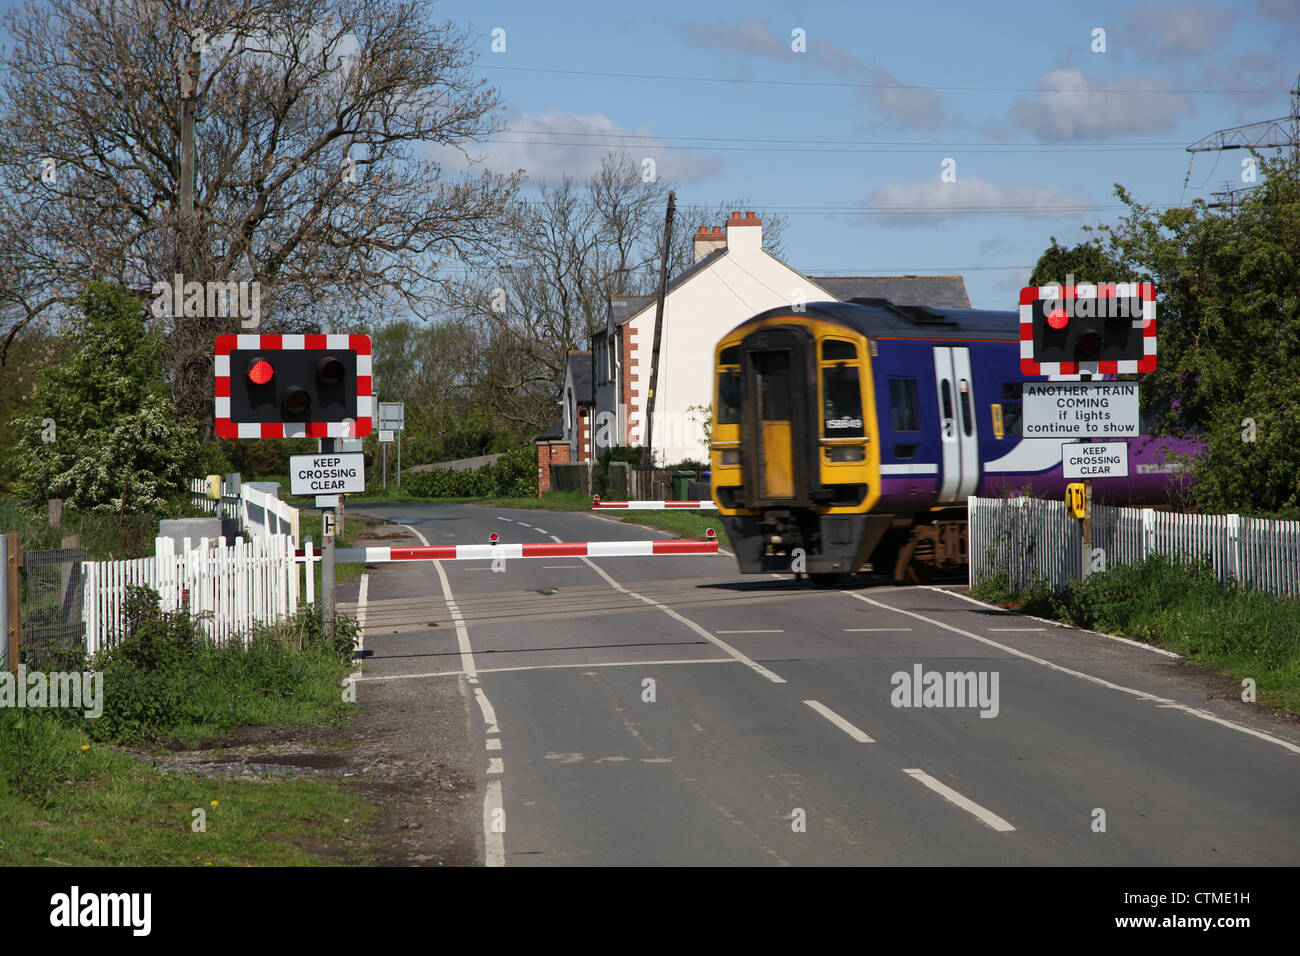 train at half barriers train crossing Stock Photo